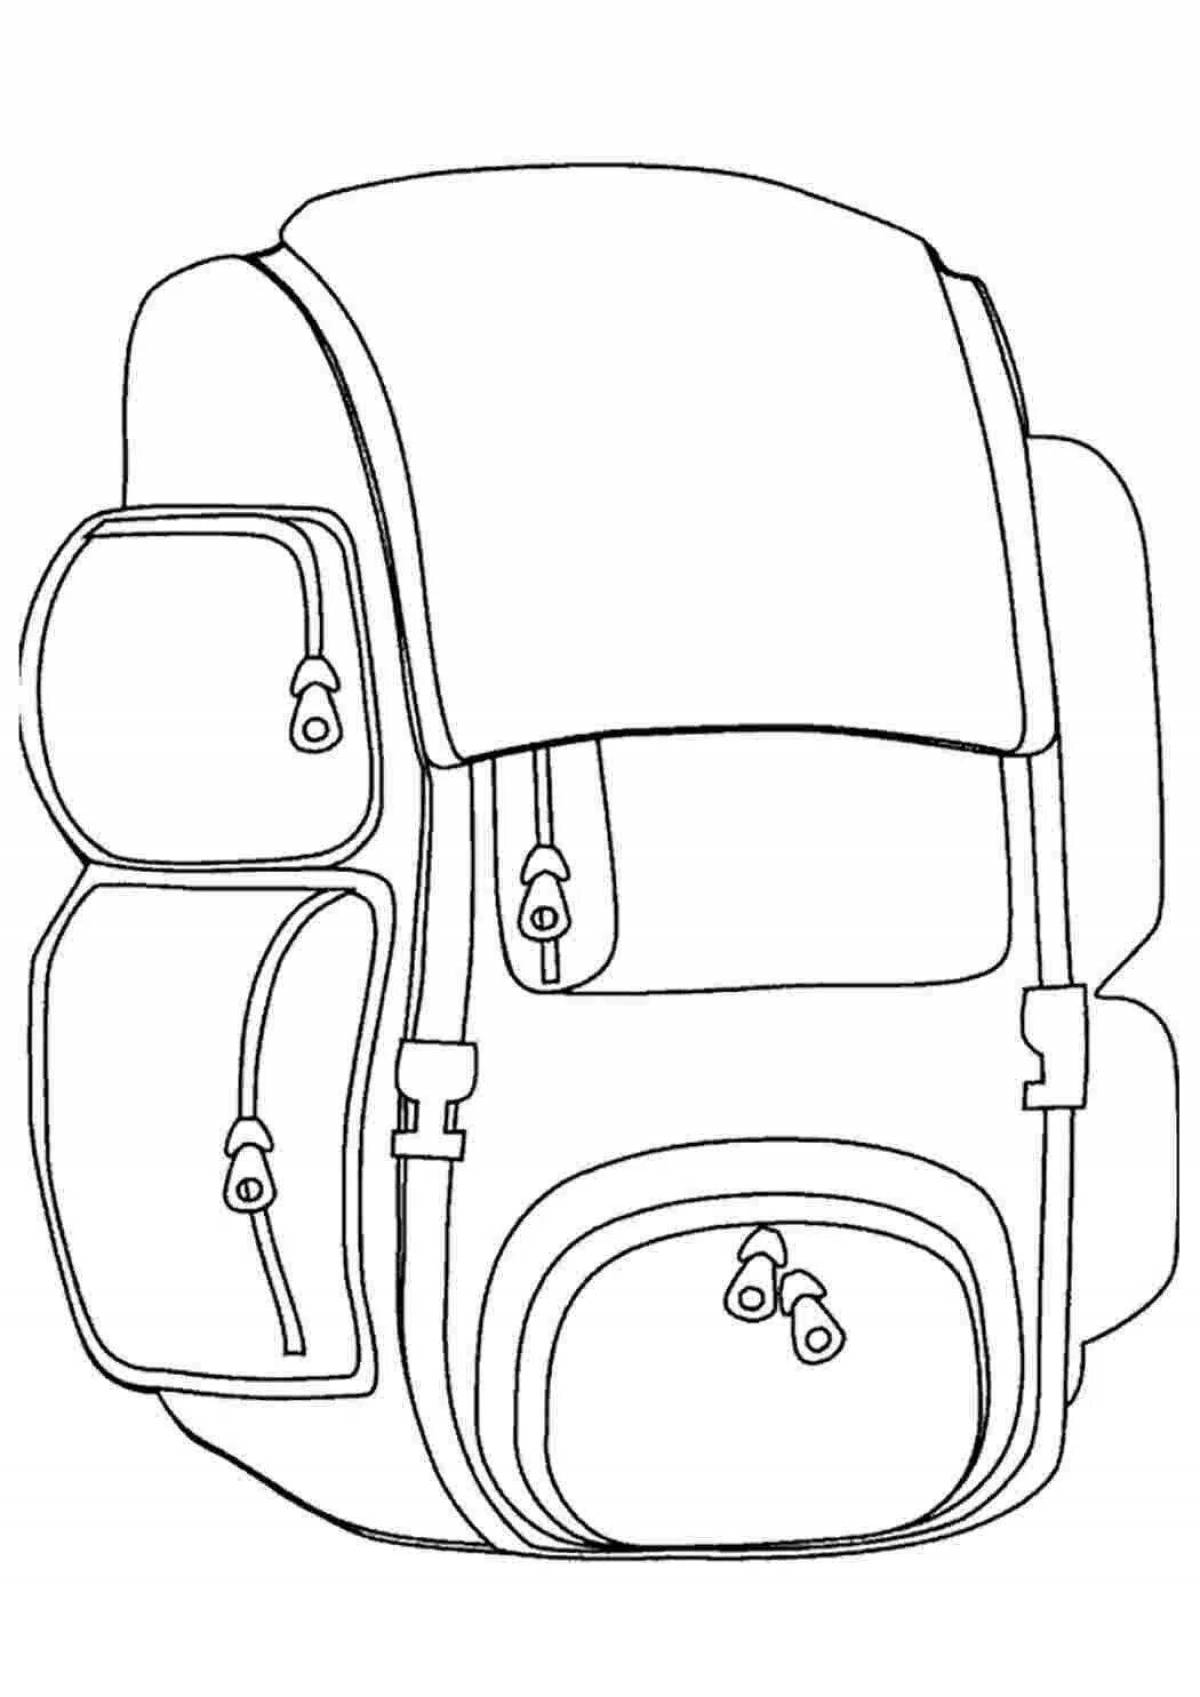 Coloring book bold backpack